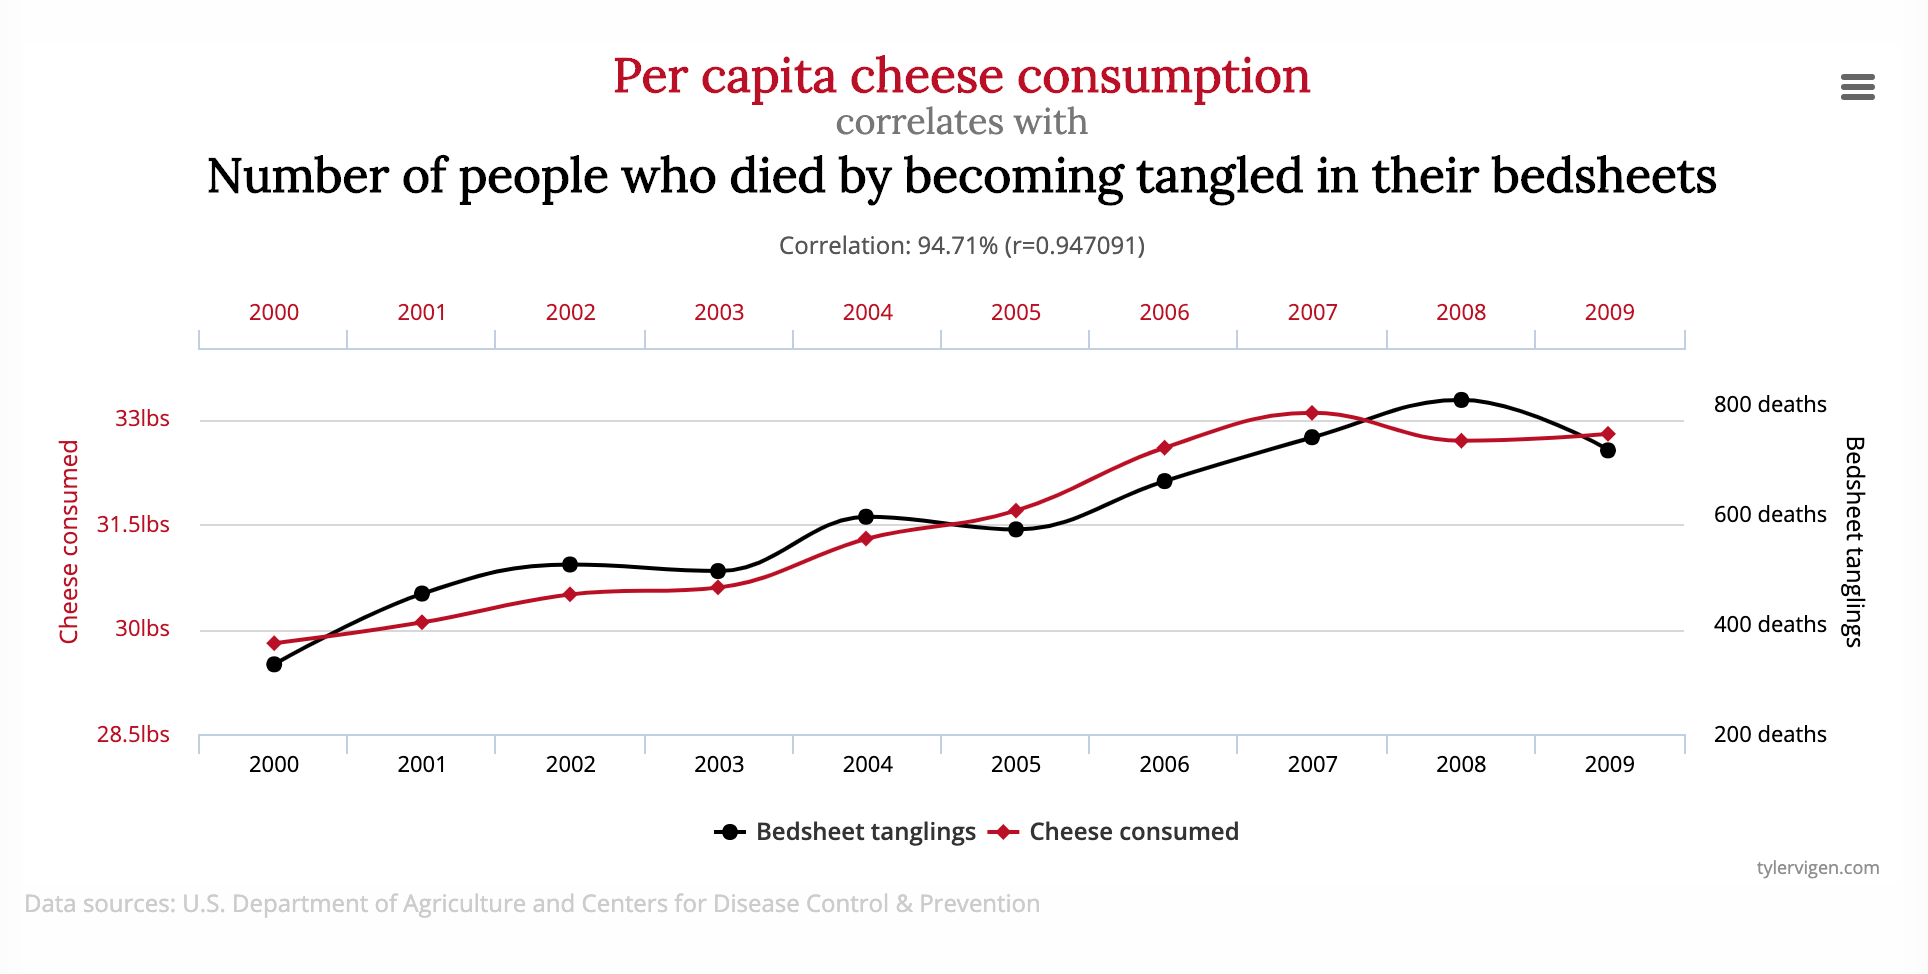 Why Correlation Does Not Imply Causation - The Meaning This Common Saying in Statistics